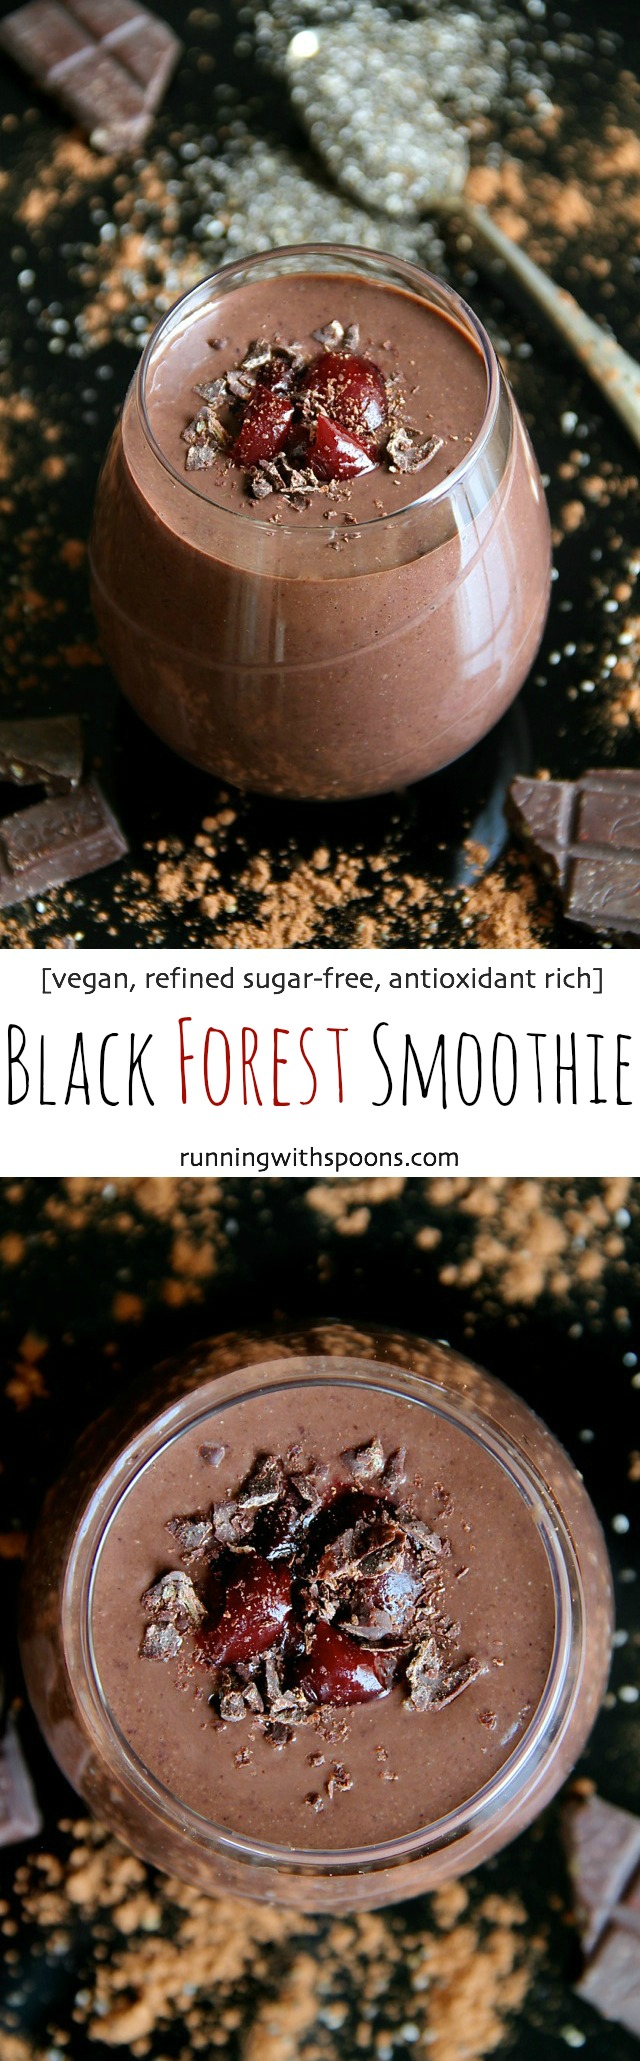 Black Forest Smoothie -- naturally sweet and loaded with antioxidants. You'd never believe this decadently chocolatey smoothie is super healthy! | runningwithspoons.com #vegan #recipe #chocolate